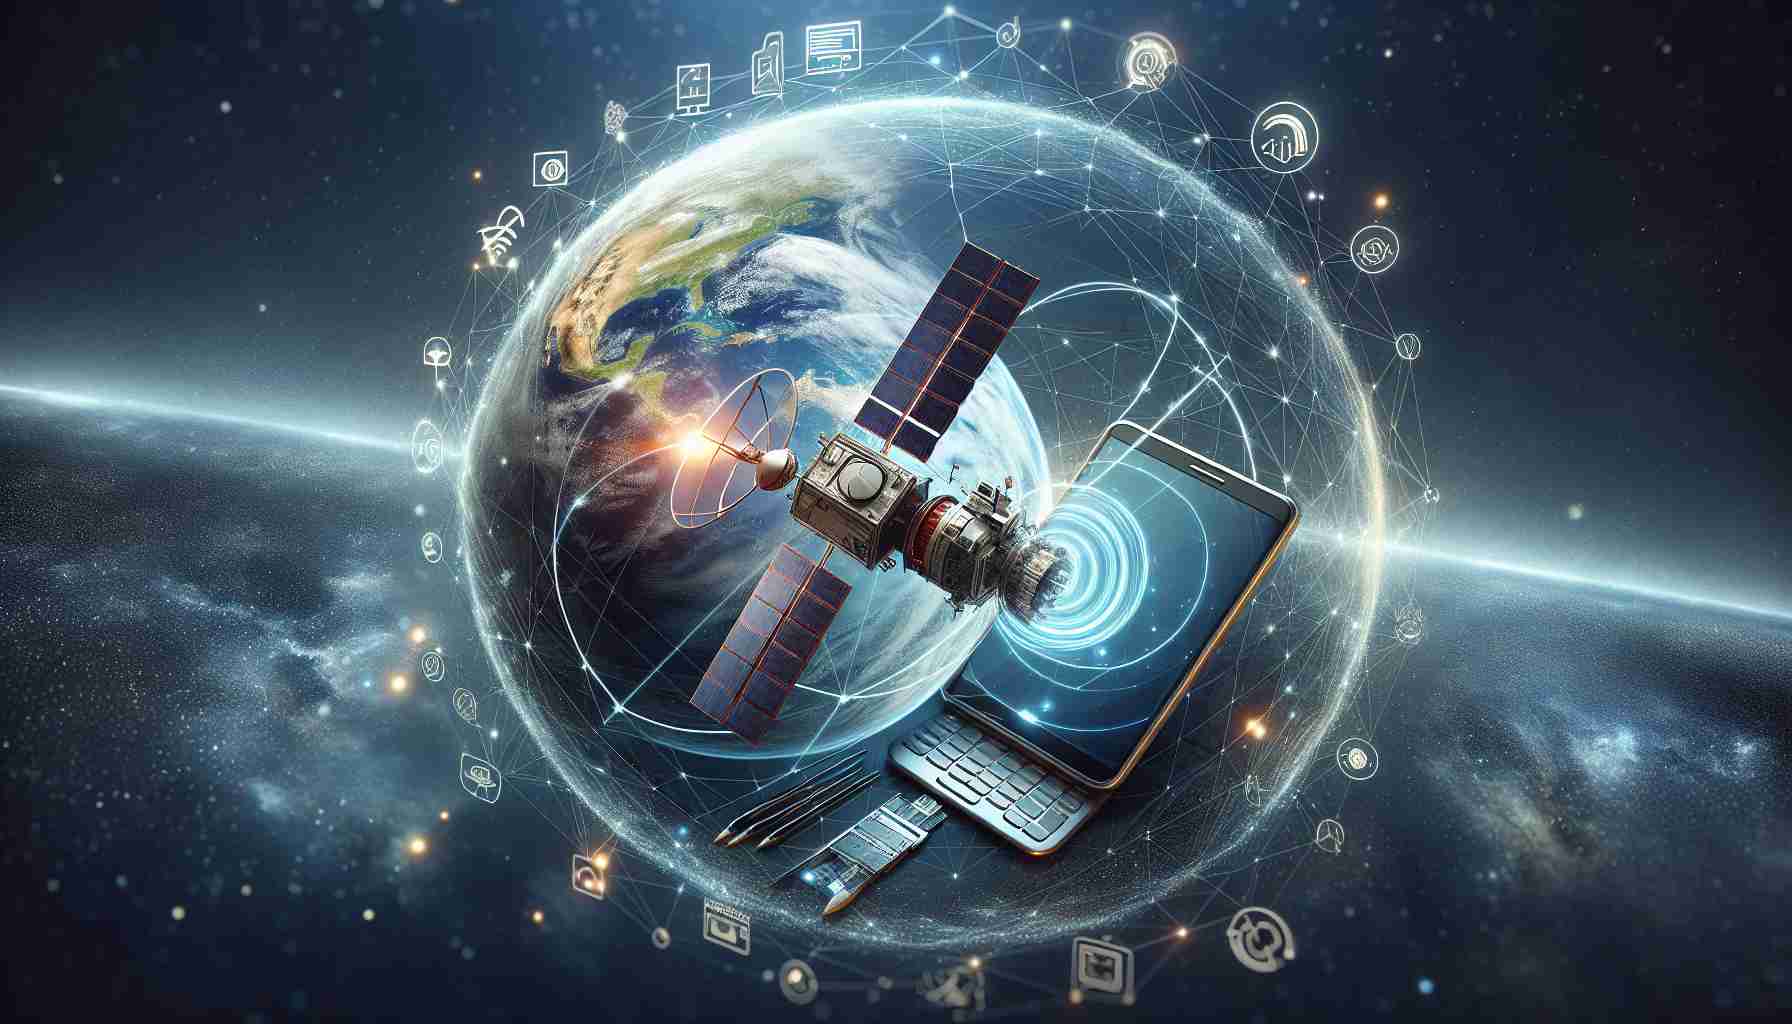 AST SpaceMobile Secures Significant Partnership with AT&T for Satellite Connectivity